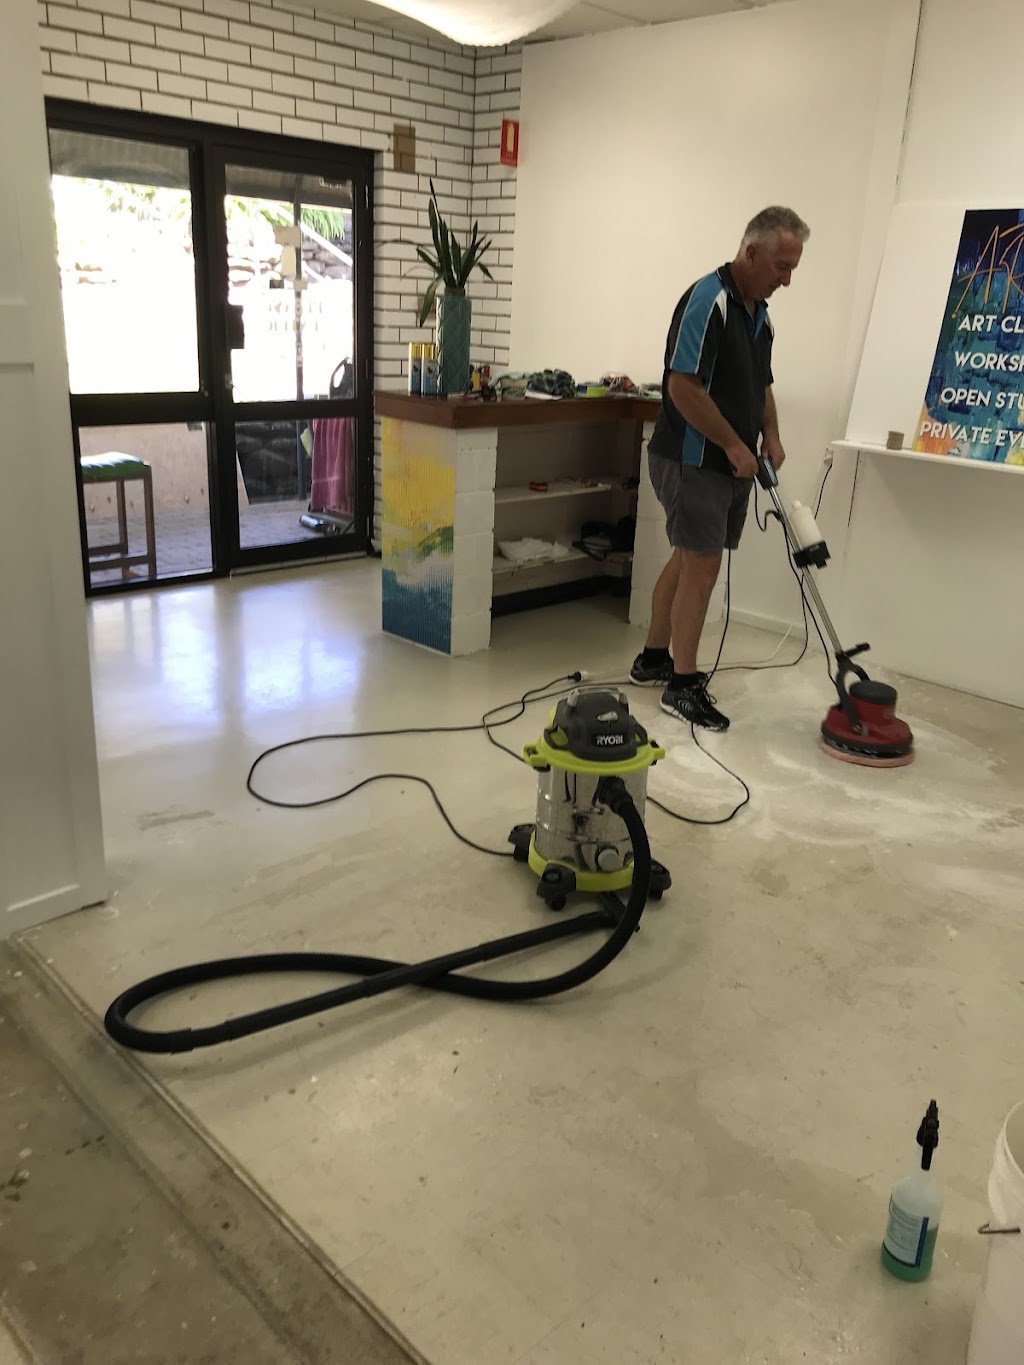 Star Diamond Carpet & Tile Cleaning Tweed Heads | laundry | 21 Banks Ave, Tweed Heads NSW 2485, Australia | 0413493397 OR +61 413 493 397